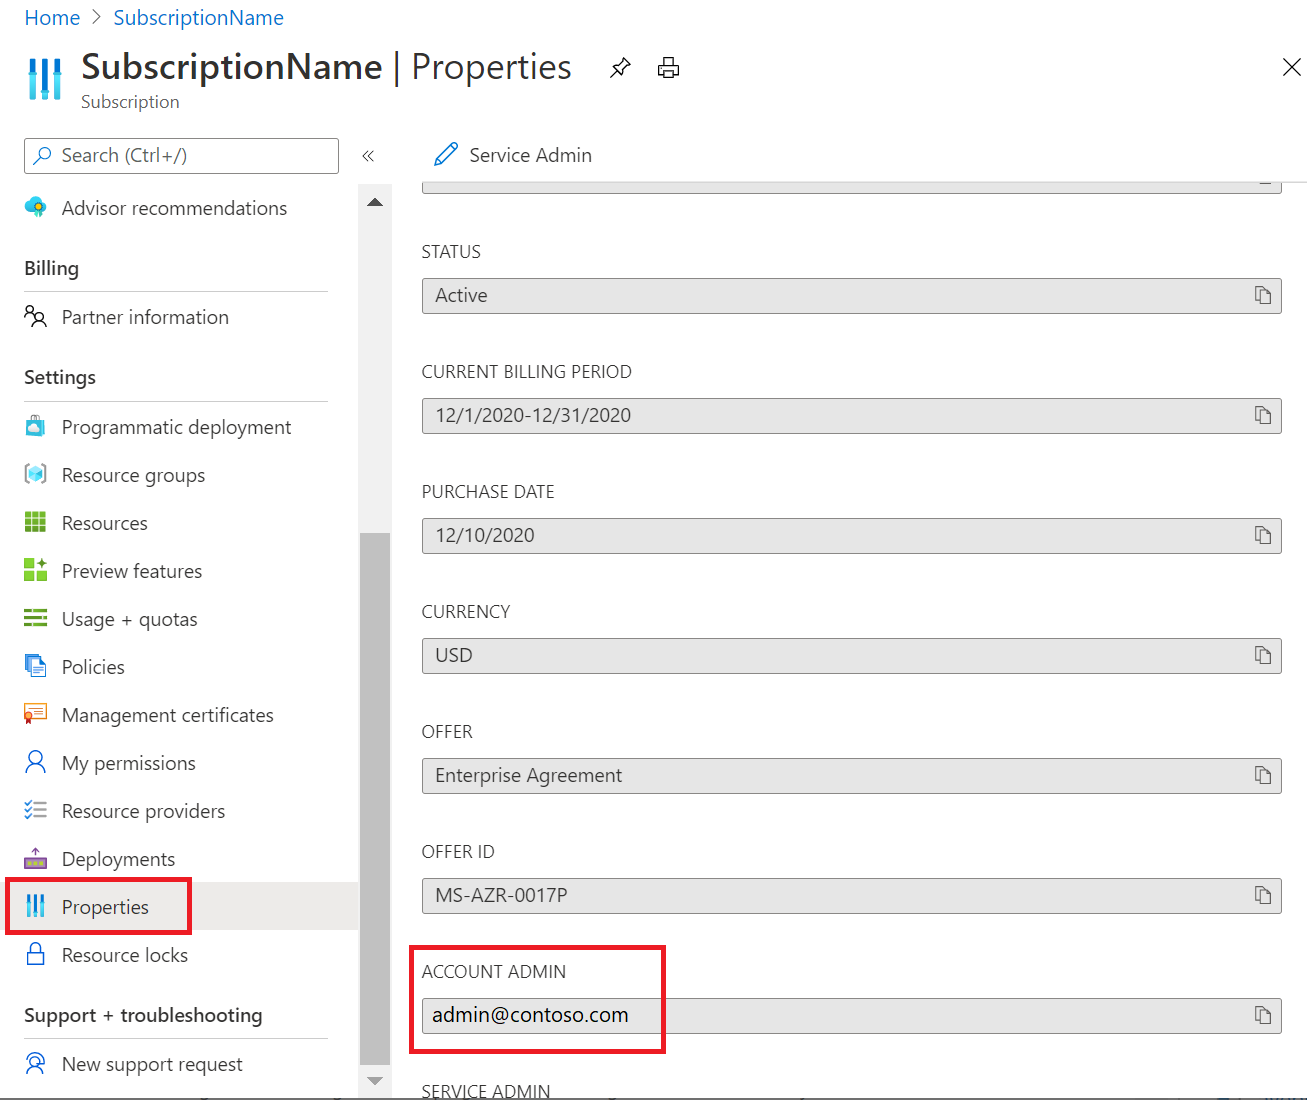 Image showing subscription properties where you can view the Account Admin